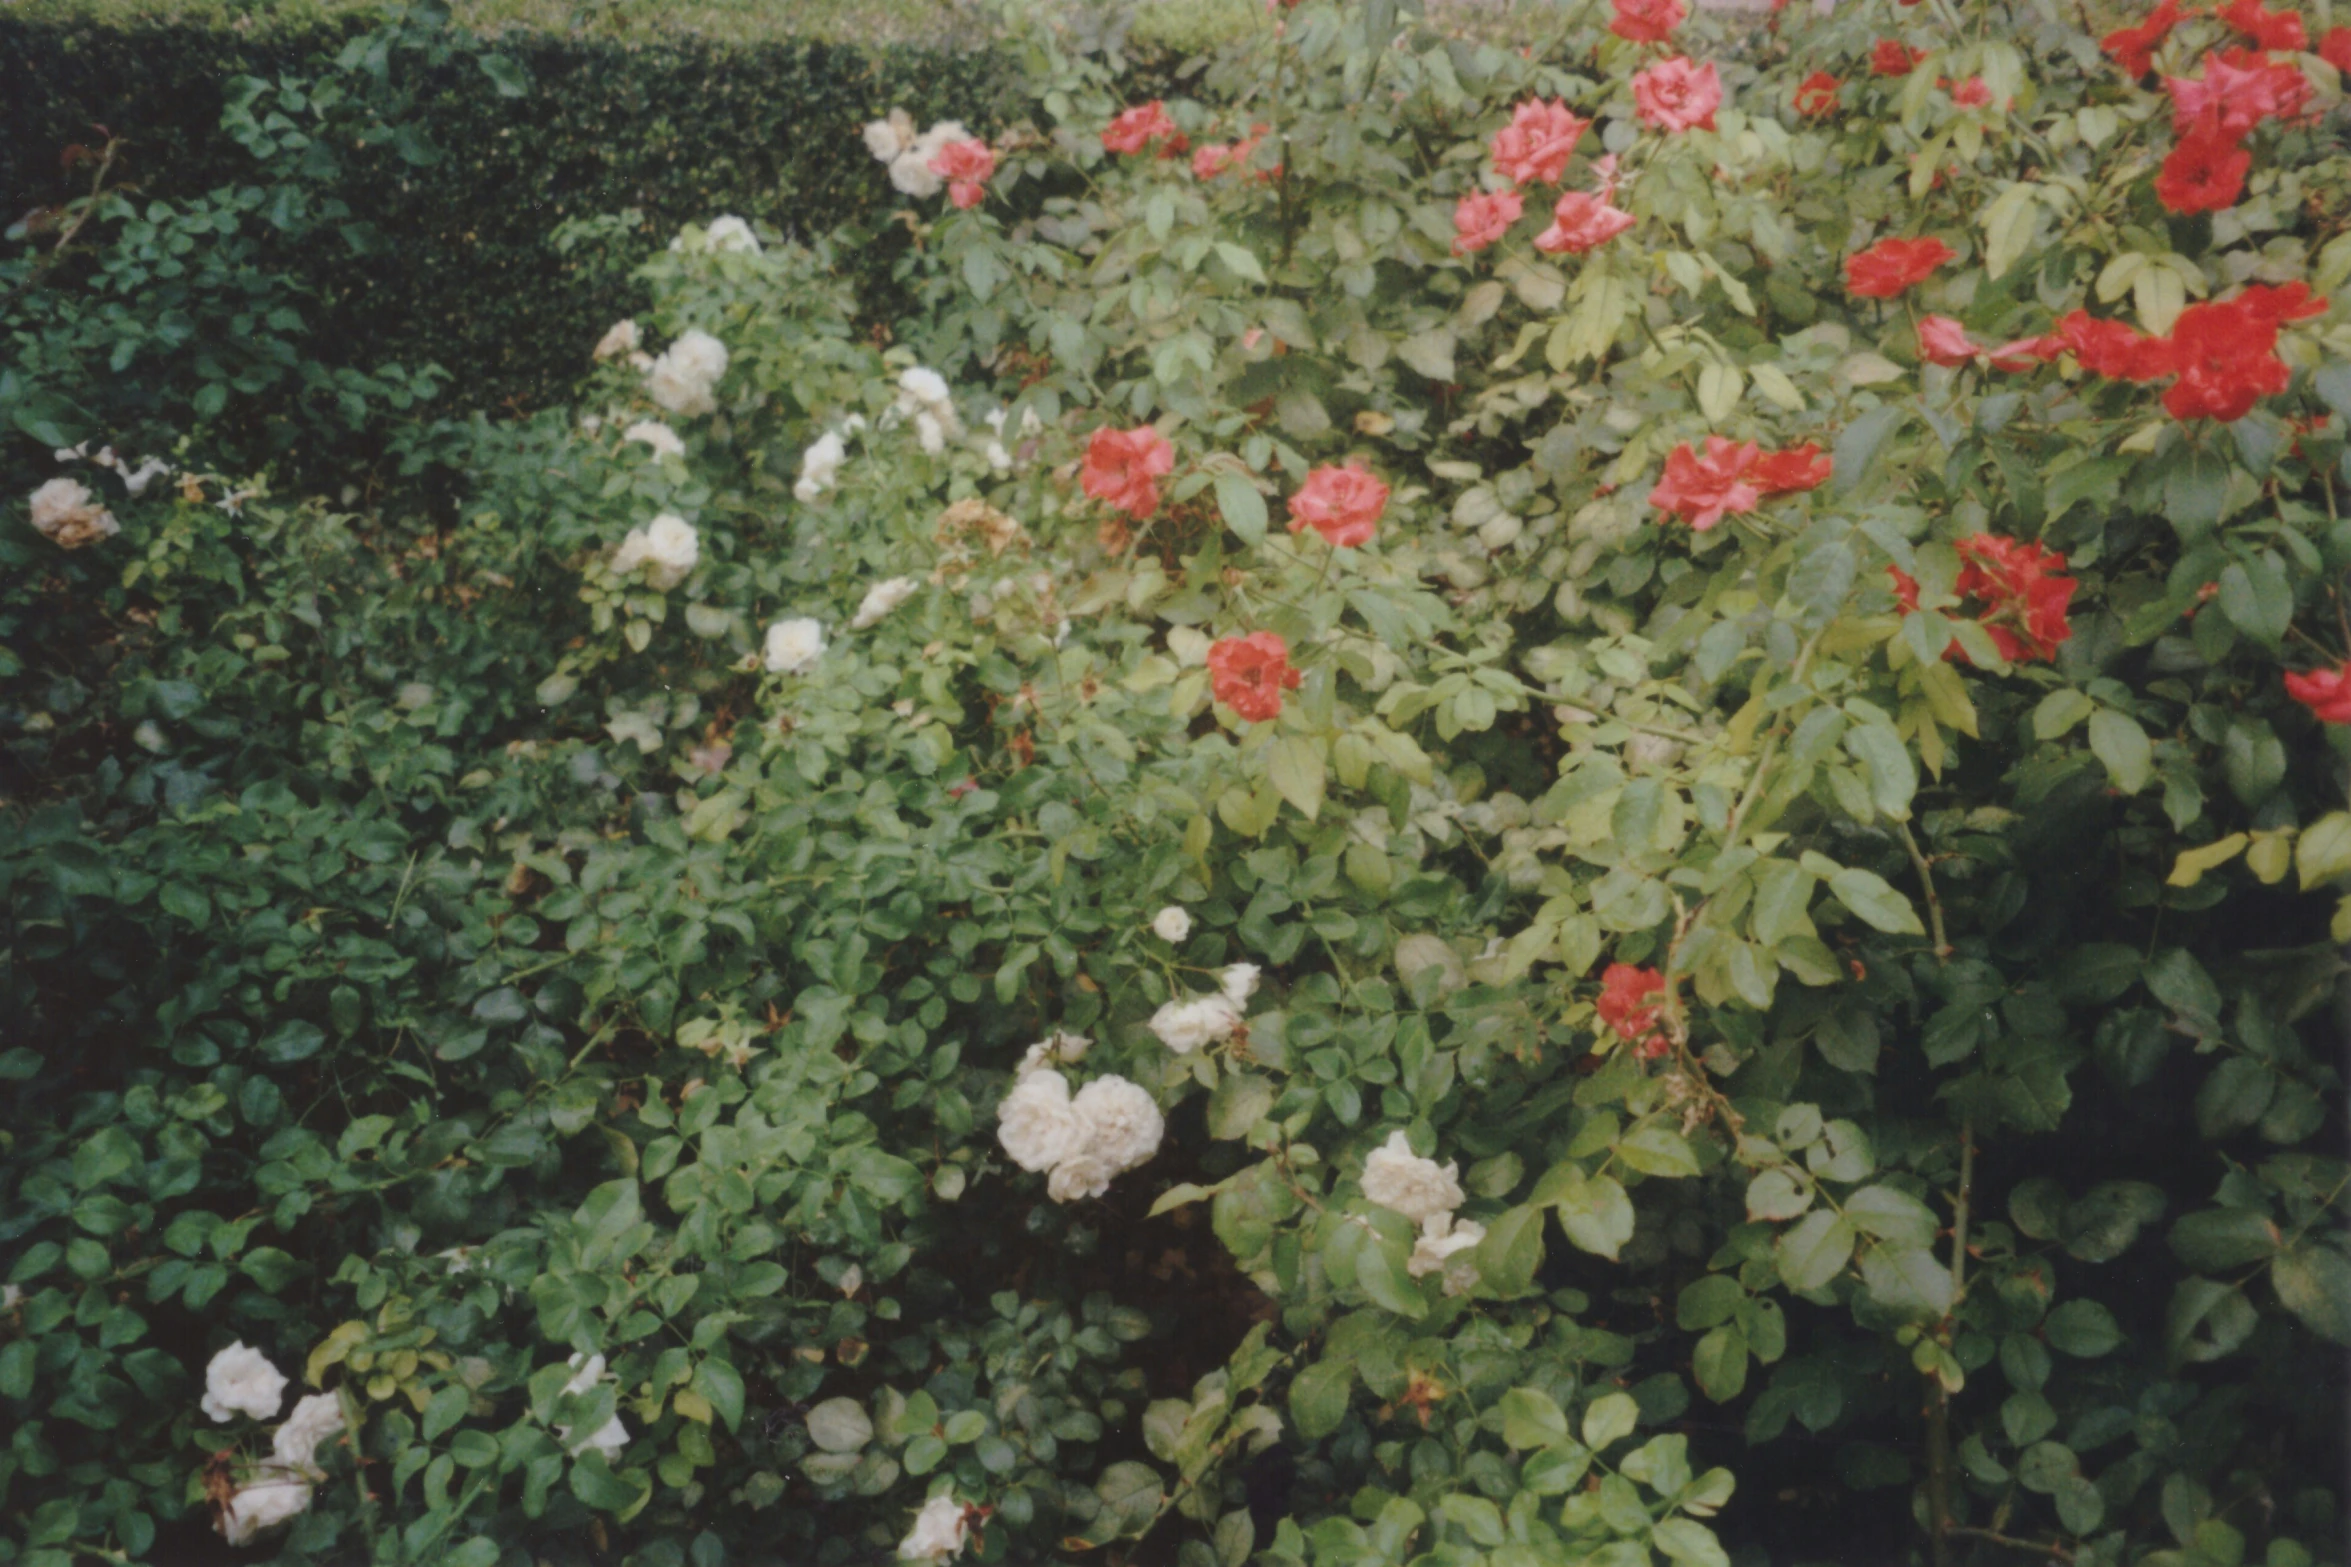 this is roses in bloom outside of a shrub